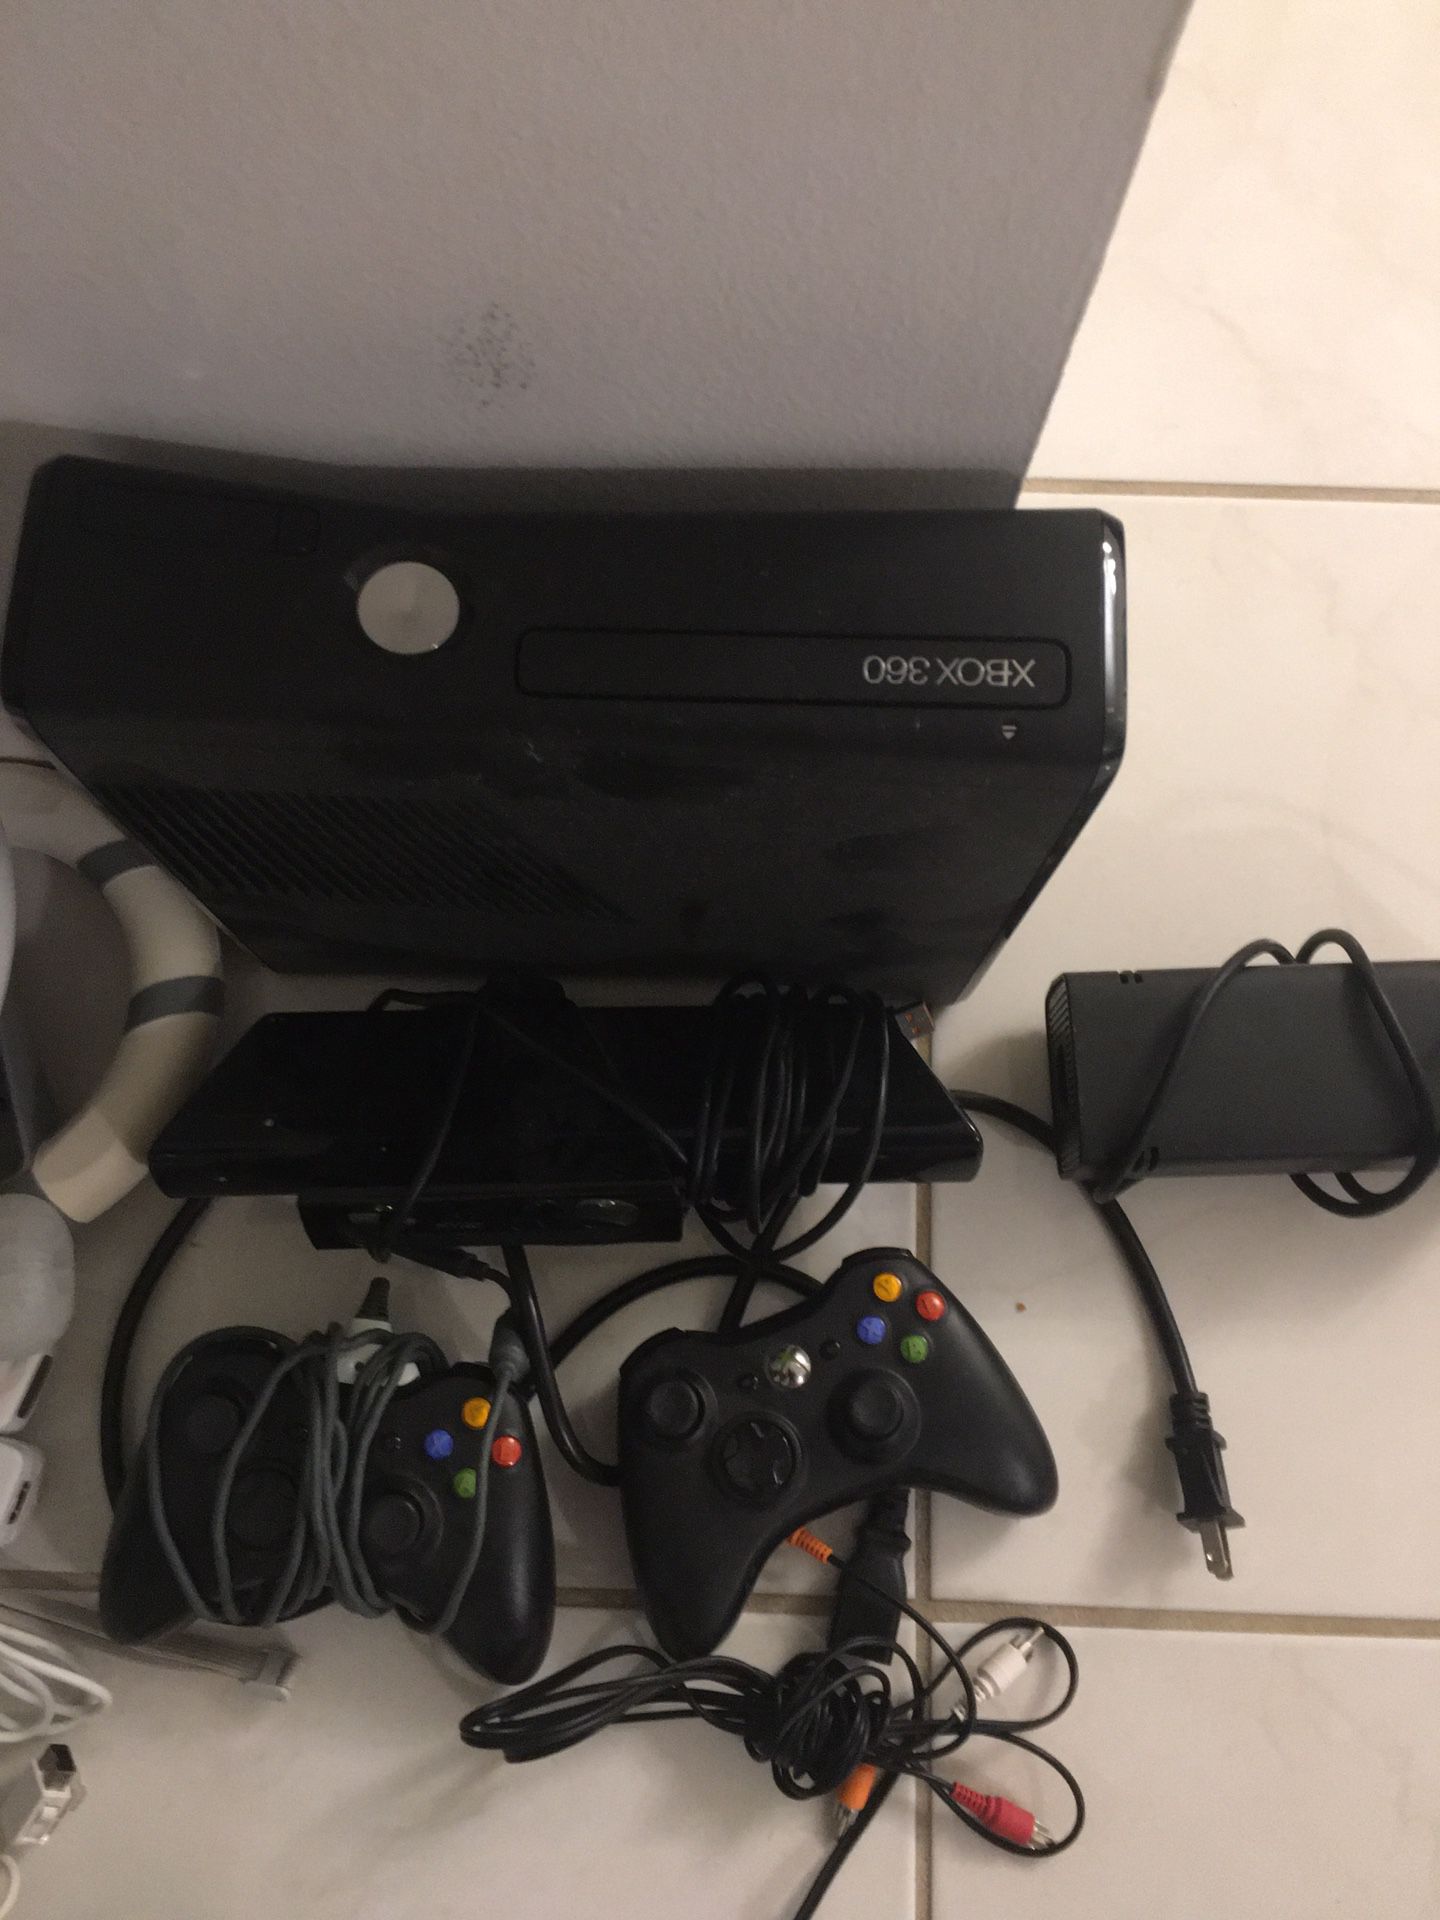 Xbox 360 with controllers and motion